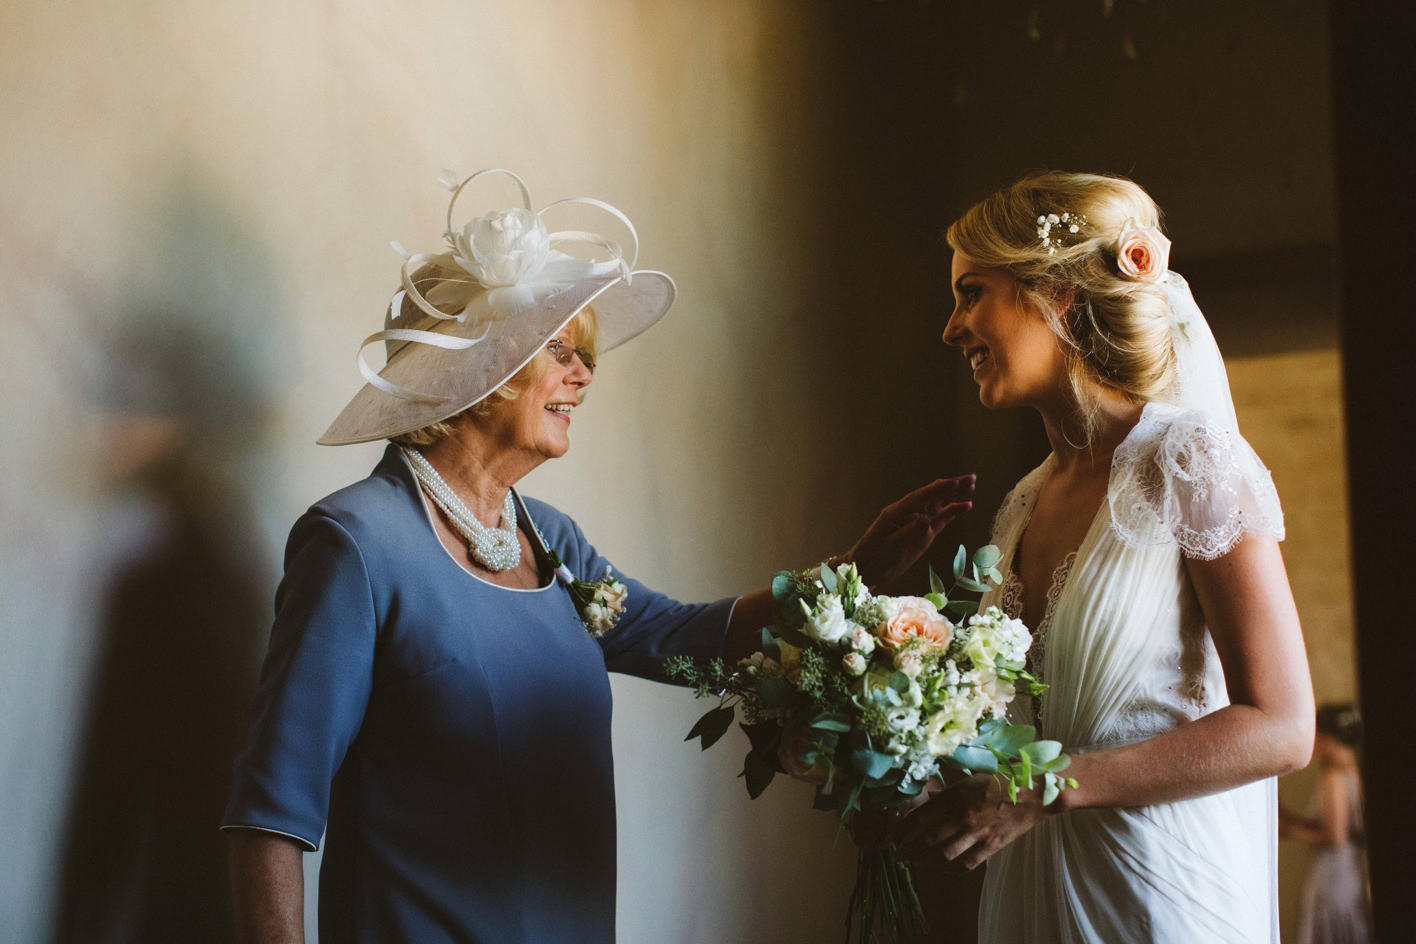 brides mother supporting daughter before her wedding ceremony